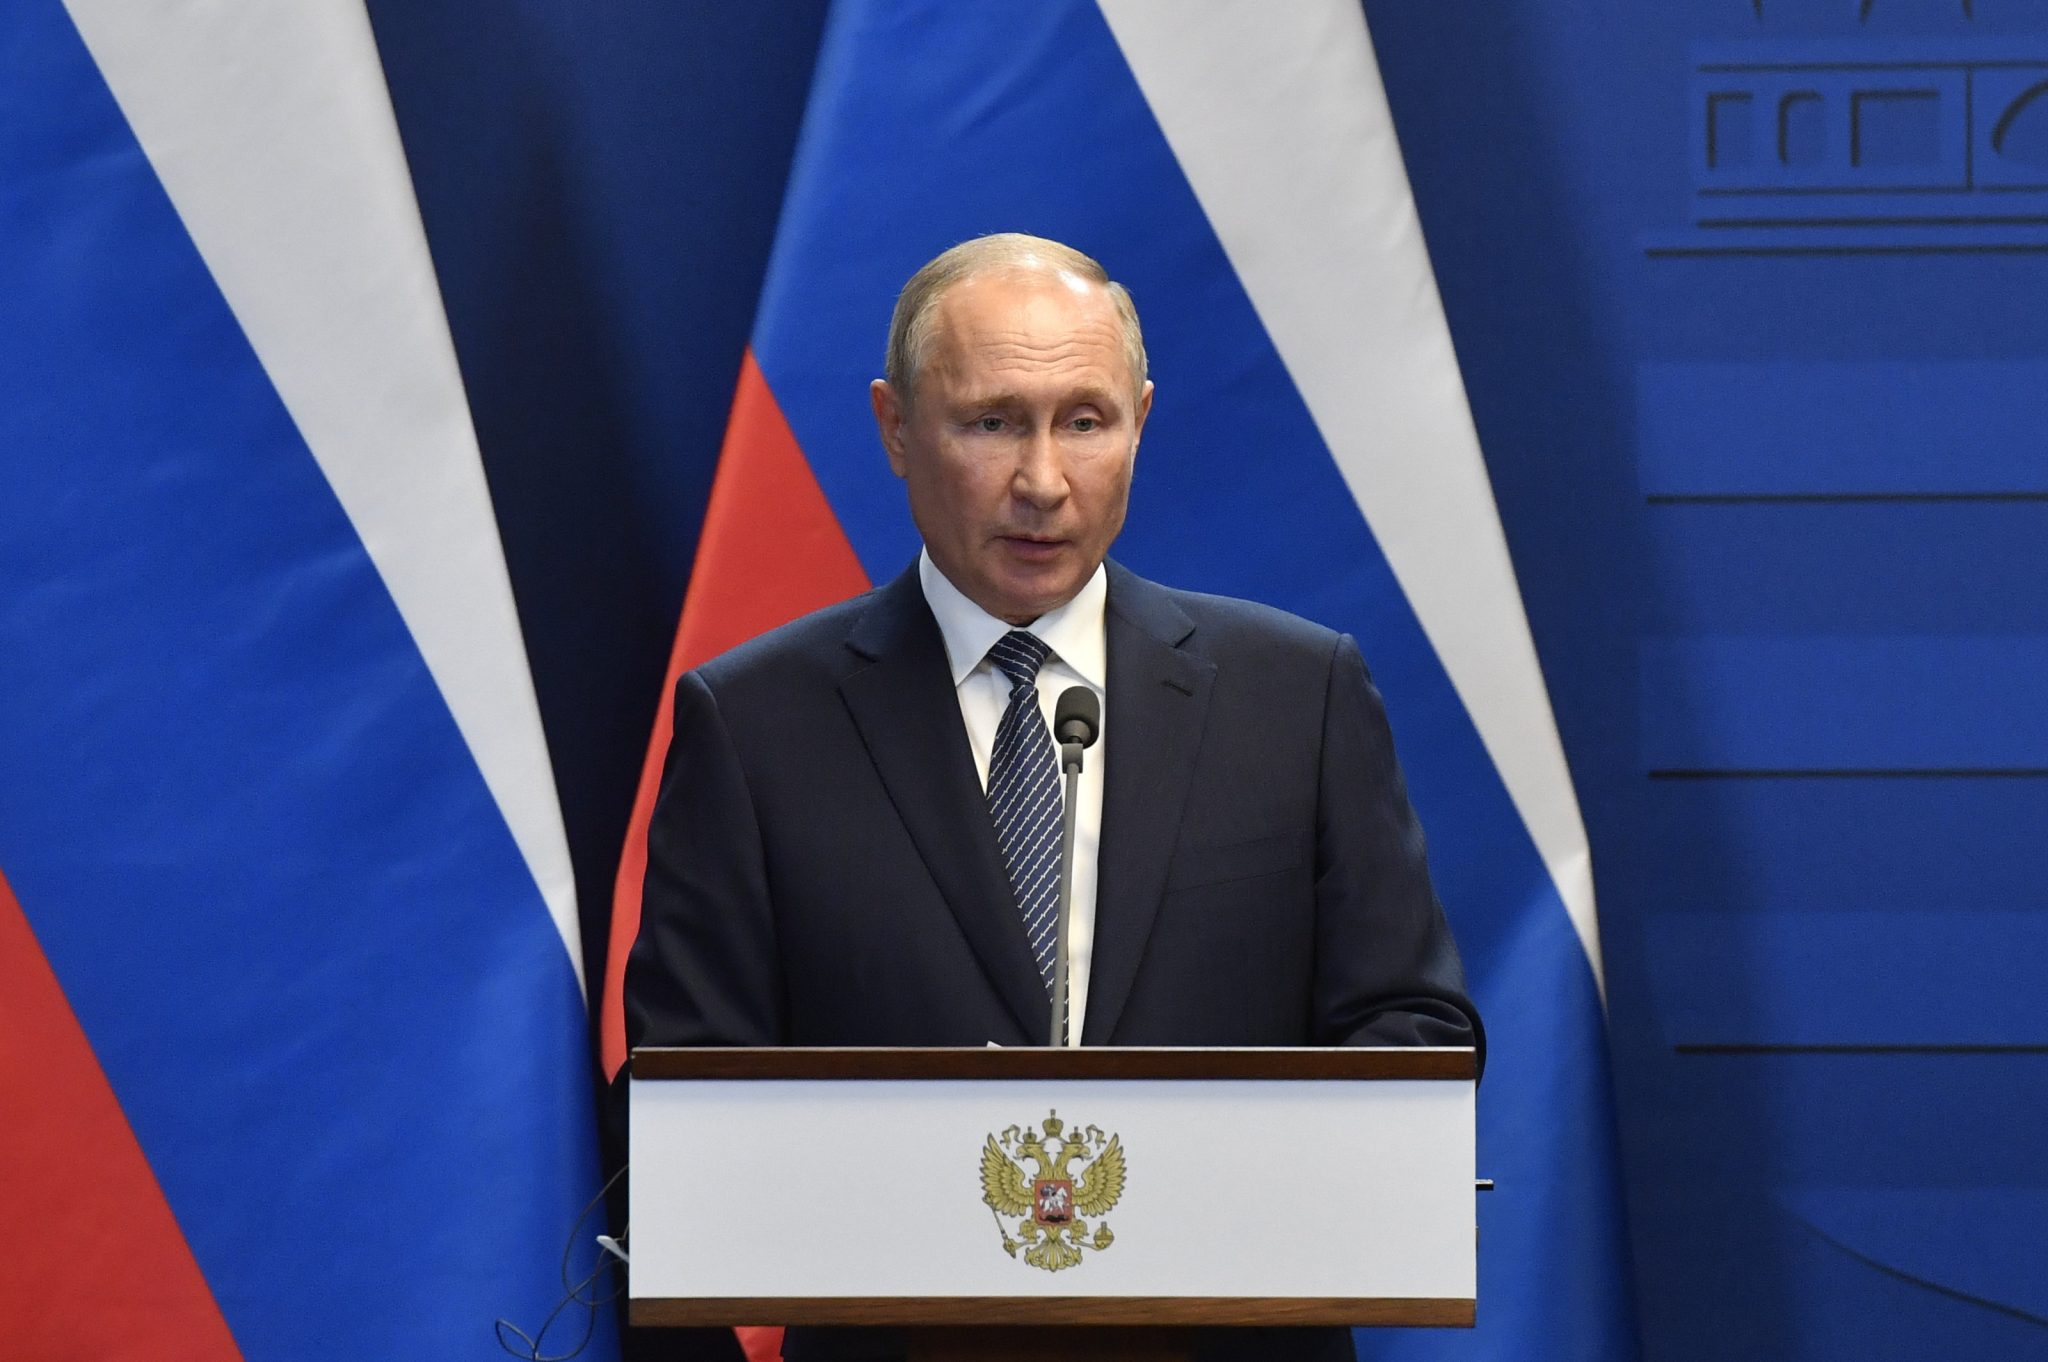 Putin in Budapest: Russia to deepen relations with Hungary